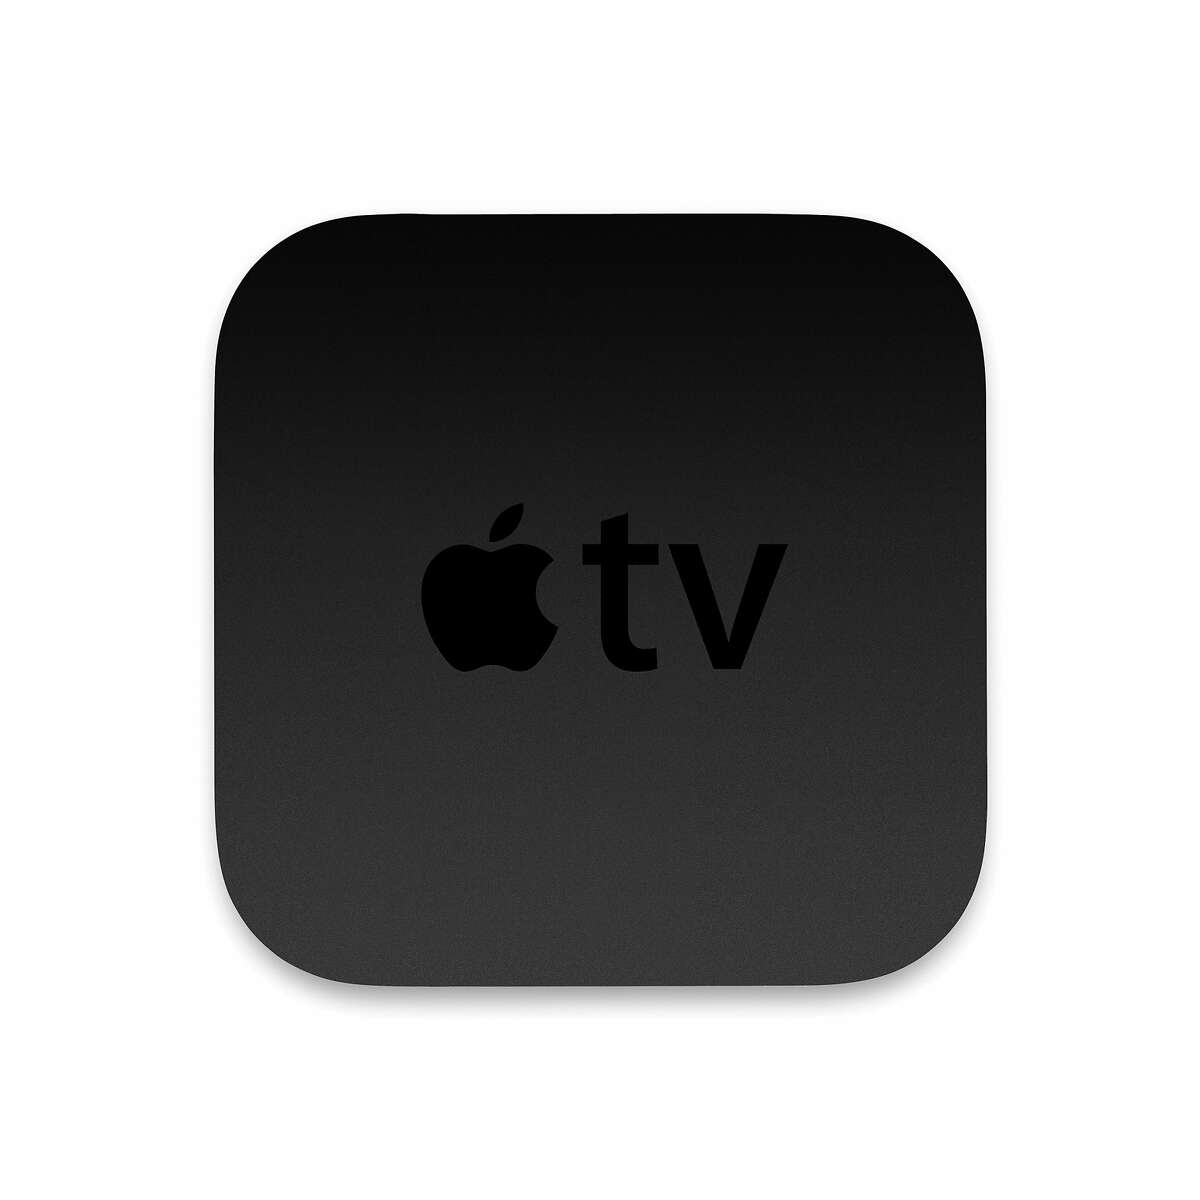 Apple® and HBO today announced HBO NOW is premiering next month, making an HBO subscription available directly to Apple customers for the first time ever. Along with the HBO NOW announcement, Apple will drop the price of Apple TV to $69 from $99.